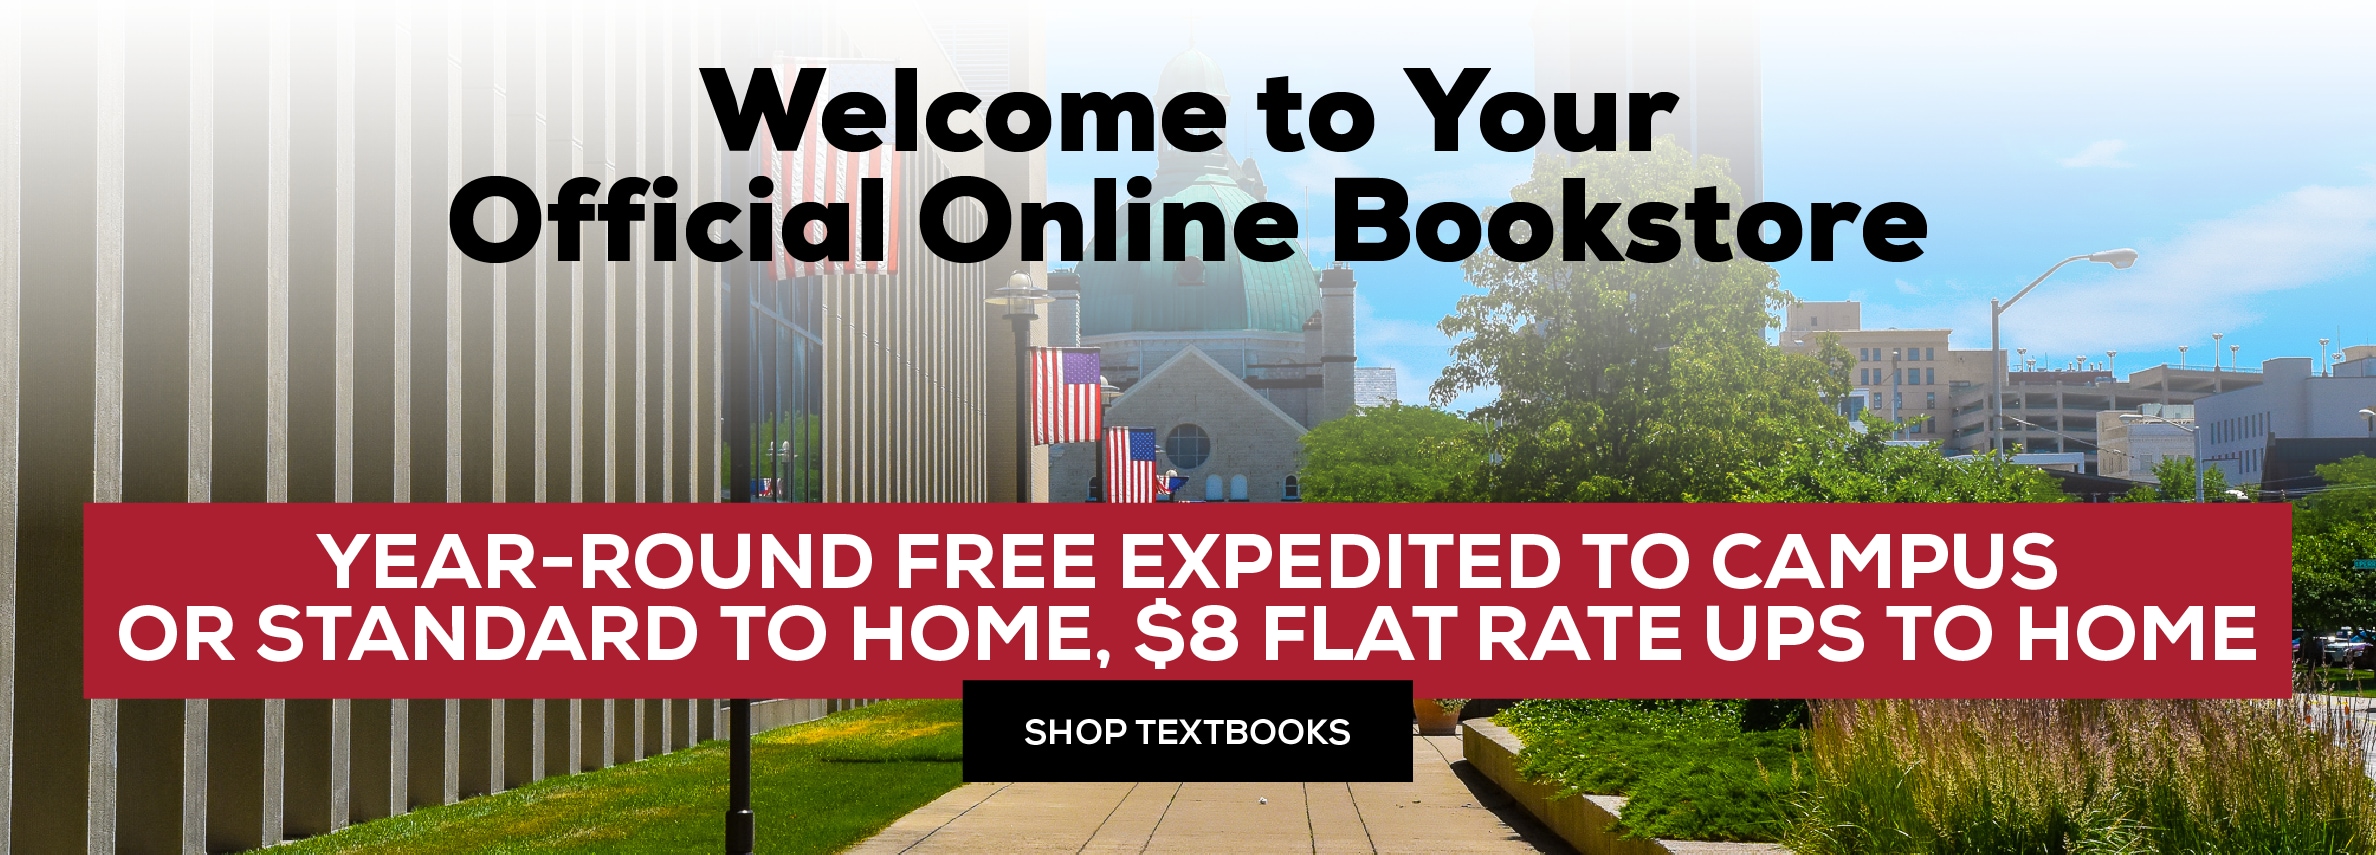 Welcome to your official Online bookstore. Year-Round free expedited to campus or standard to home, $8 flat rate UPS to home. Shop Textbooks